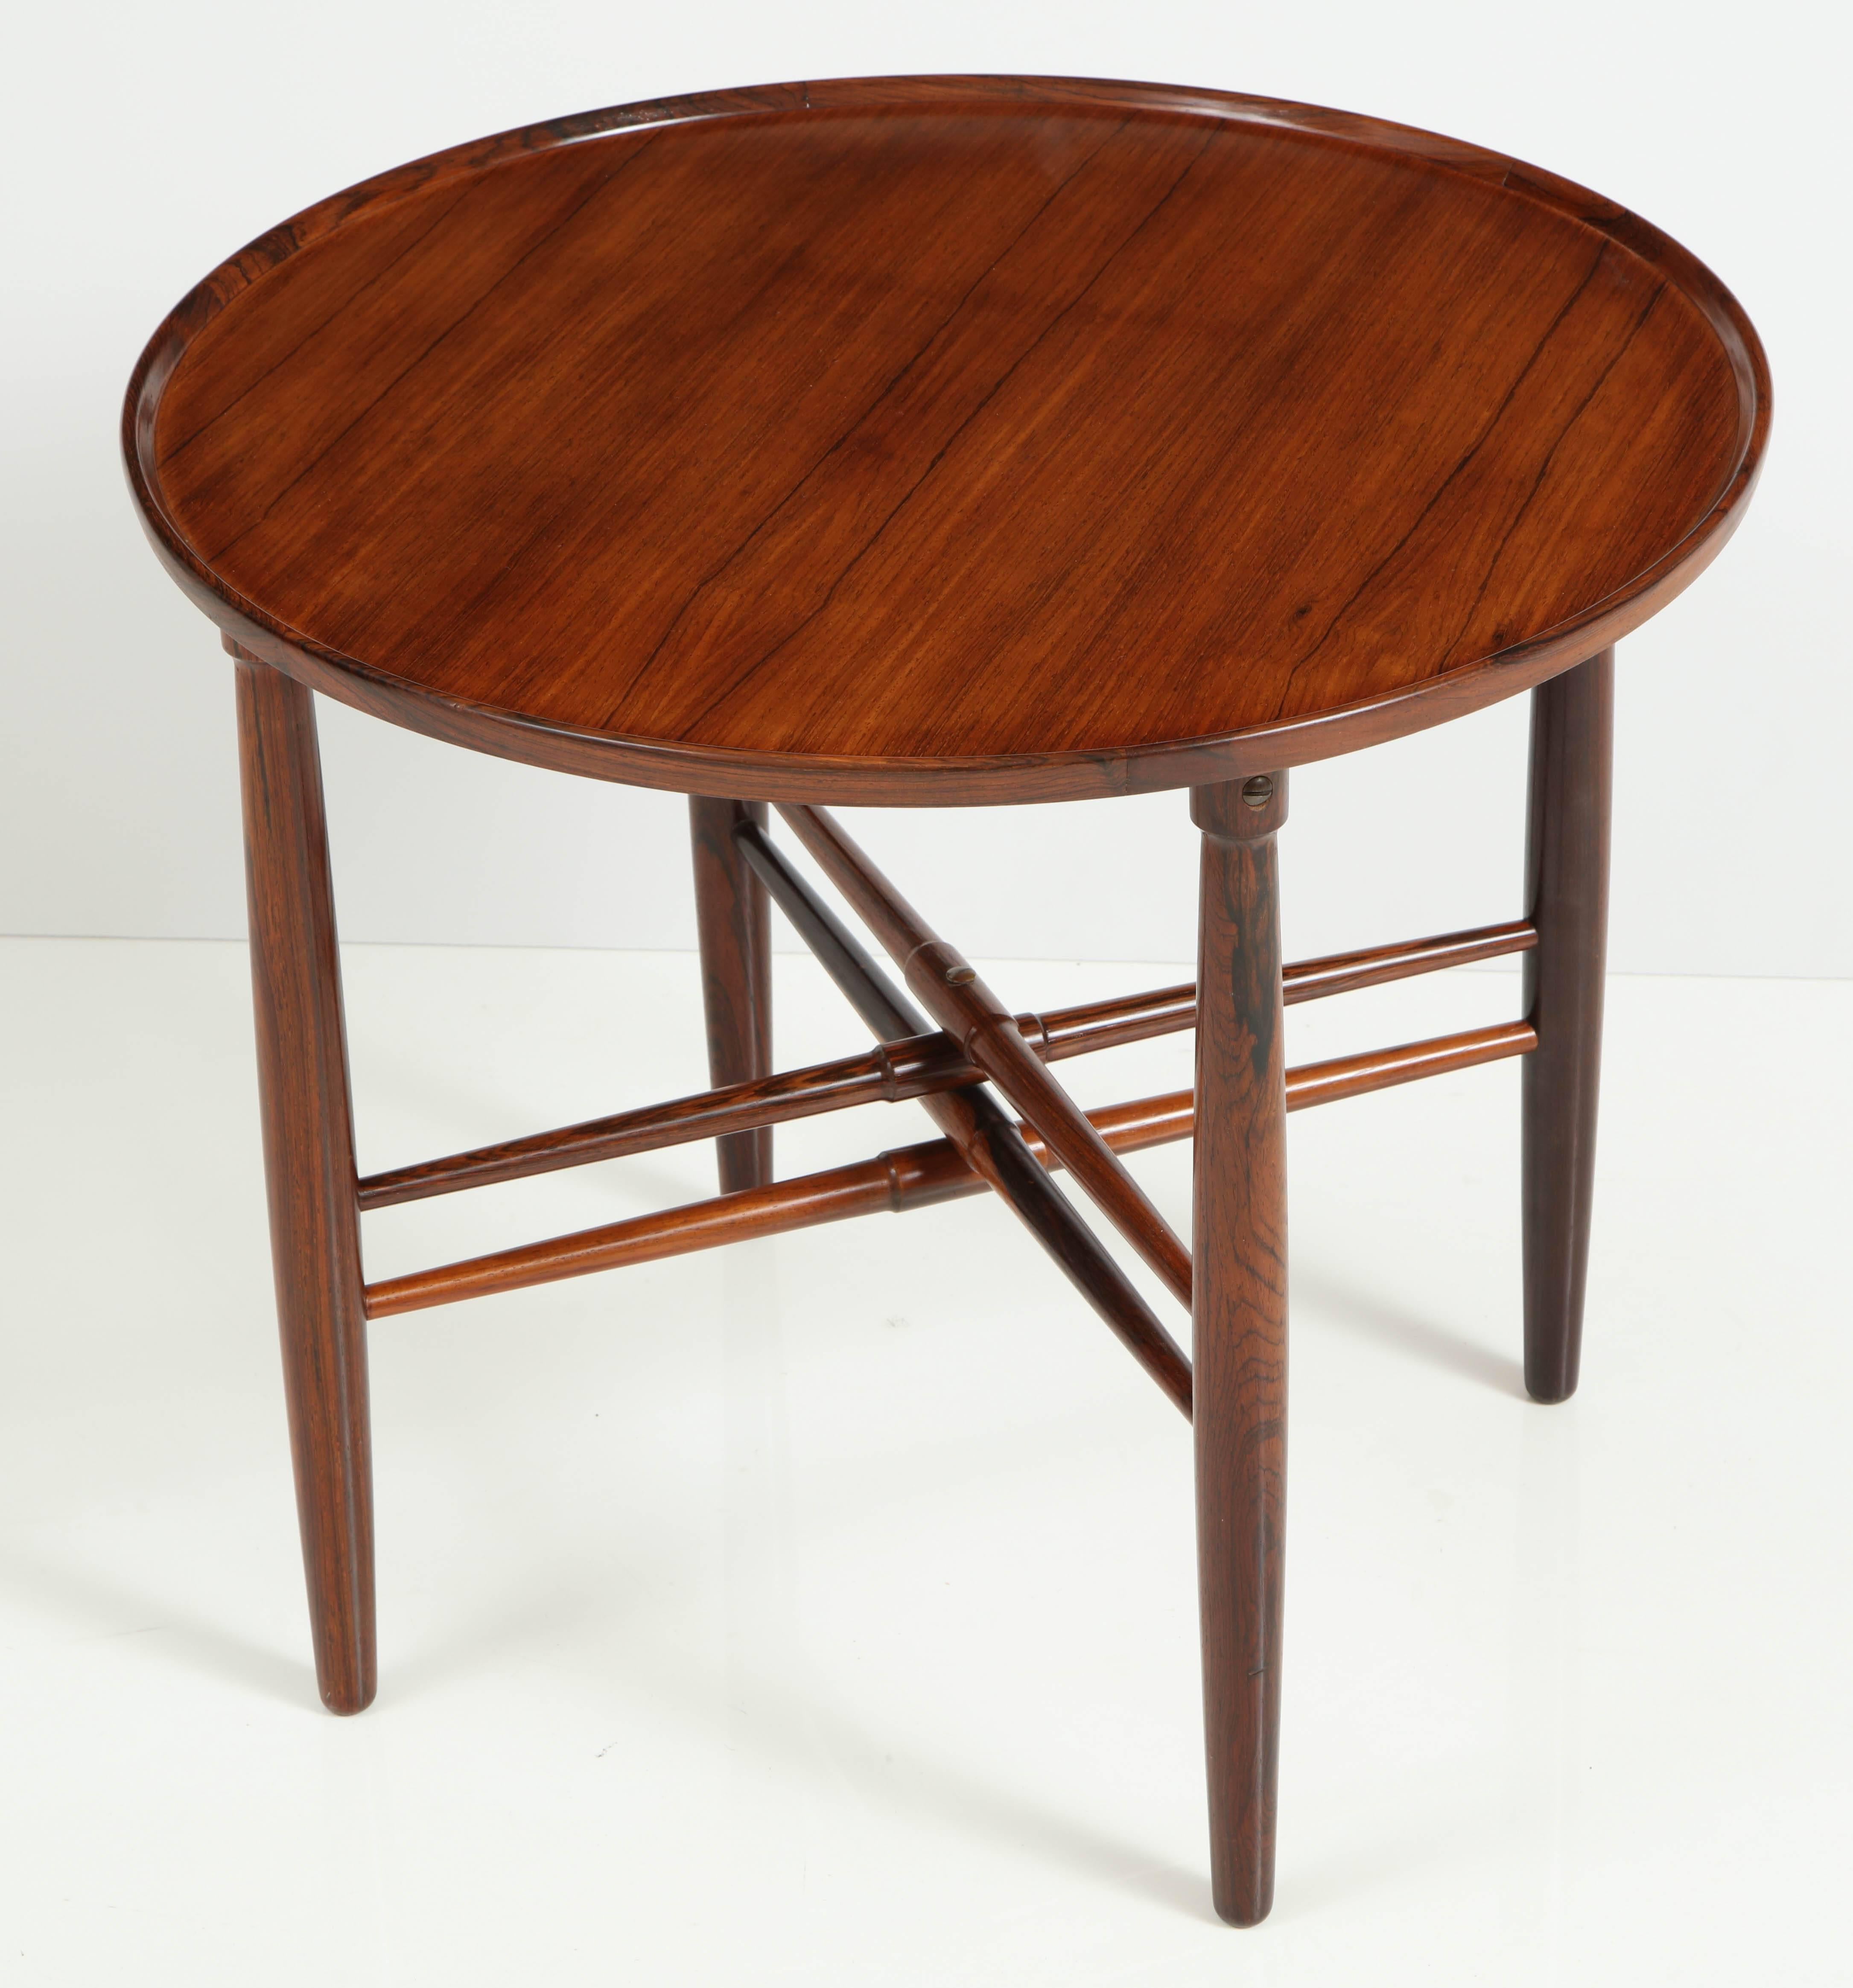 A good Danish rosewood side table, circa 1940s, the circular lipped top above for tapered turned legs joined by double turned and tapered X-form stretchers. Very nice quality table in both material and cabinetmaking.